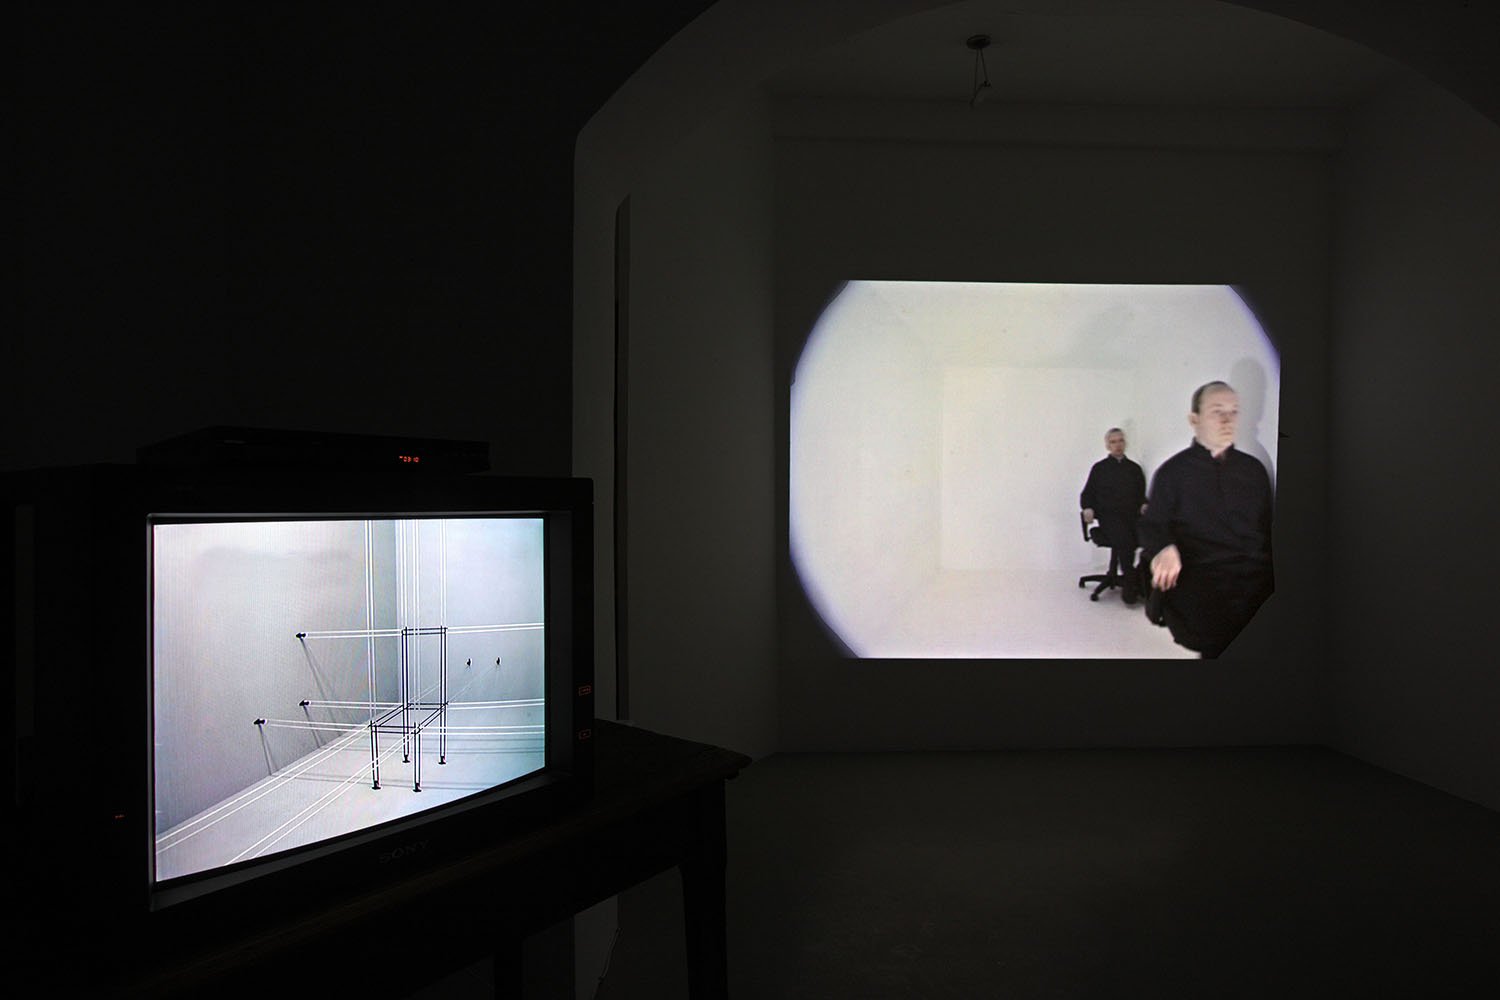 Twenty Six (Drawing and Falling Things), Table and Chairs, 2001, video installation